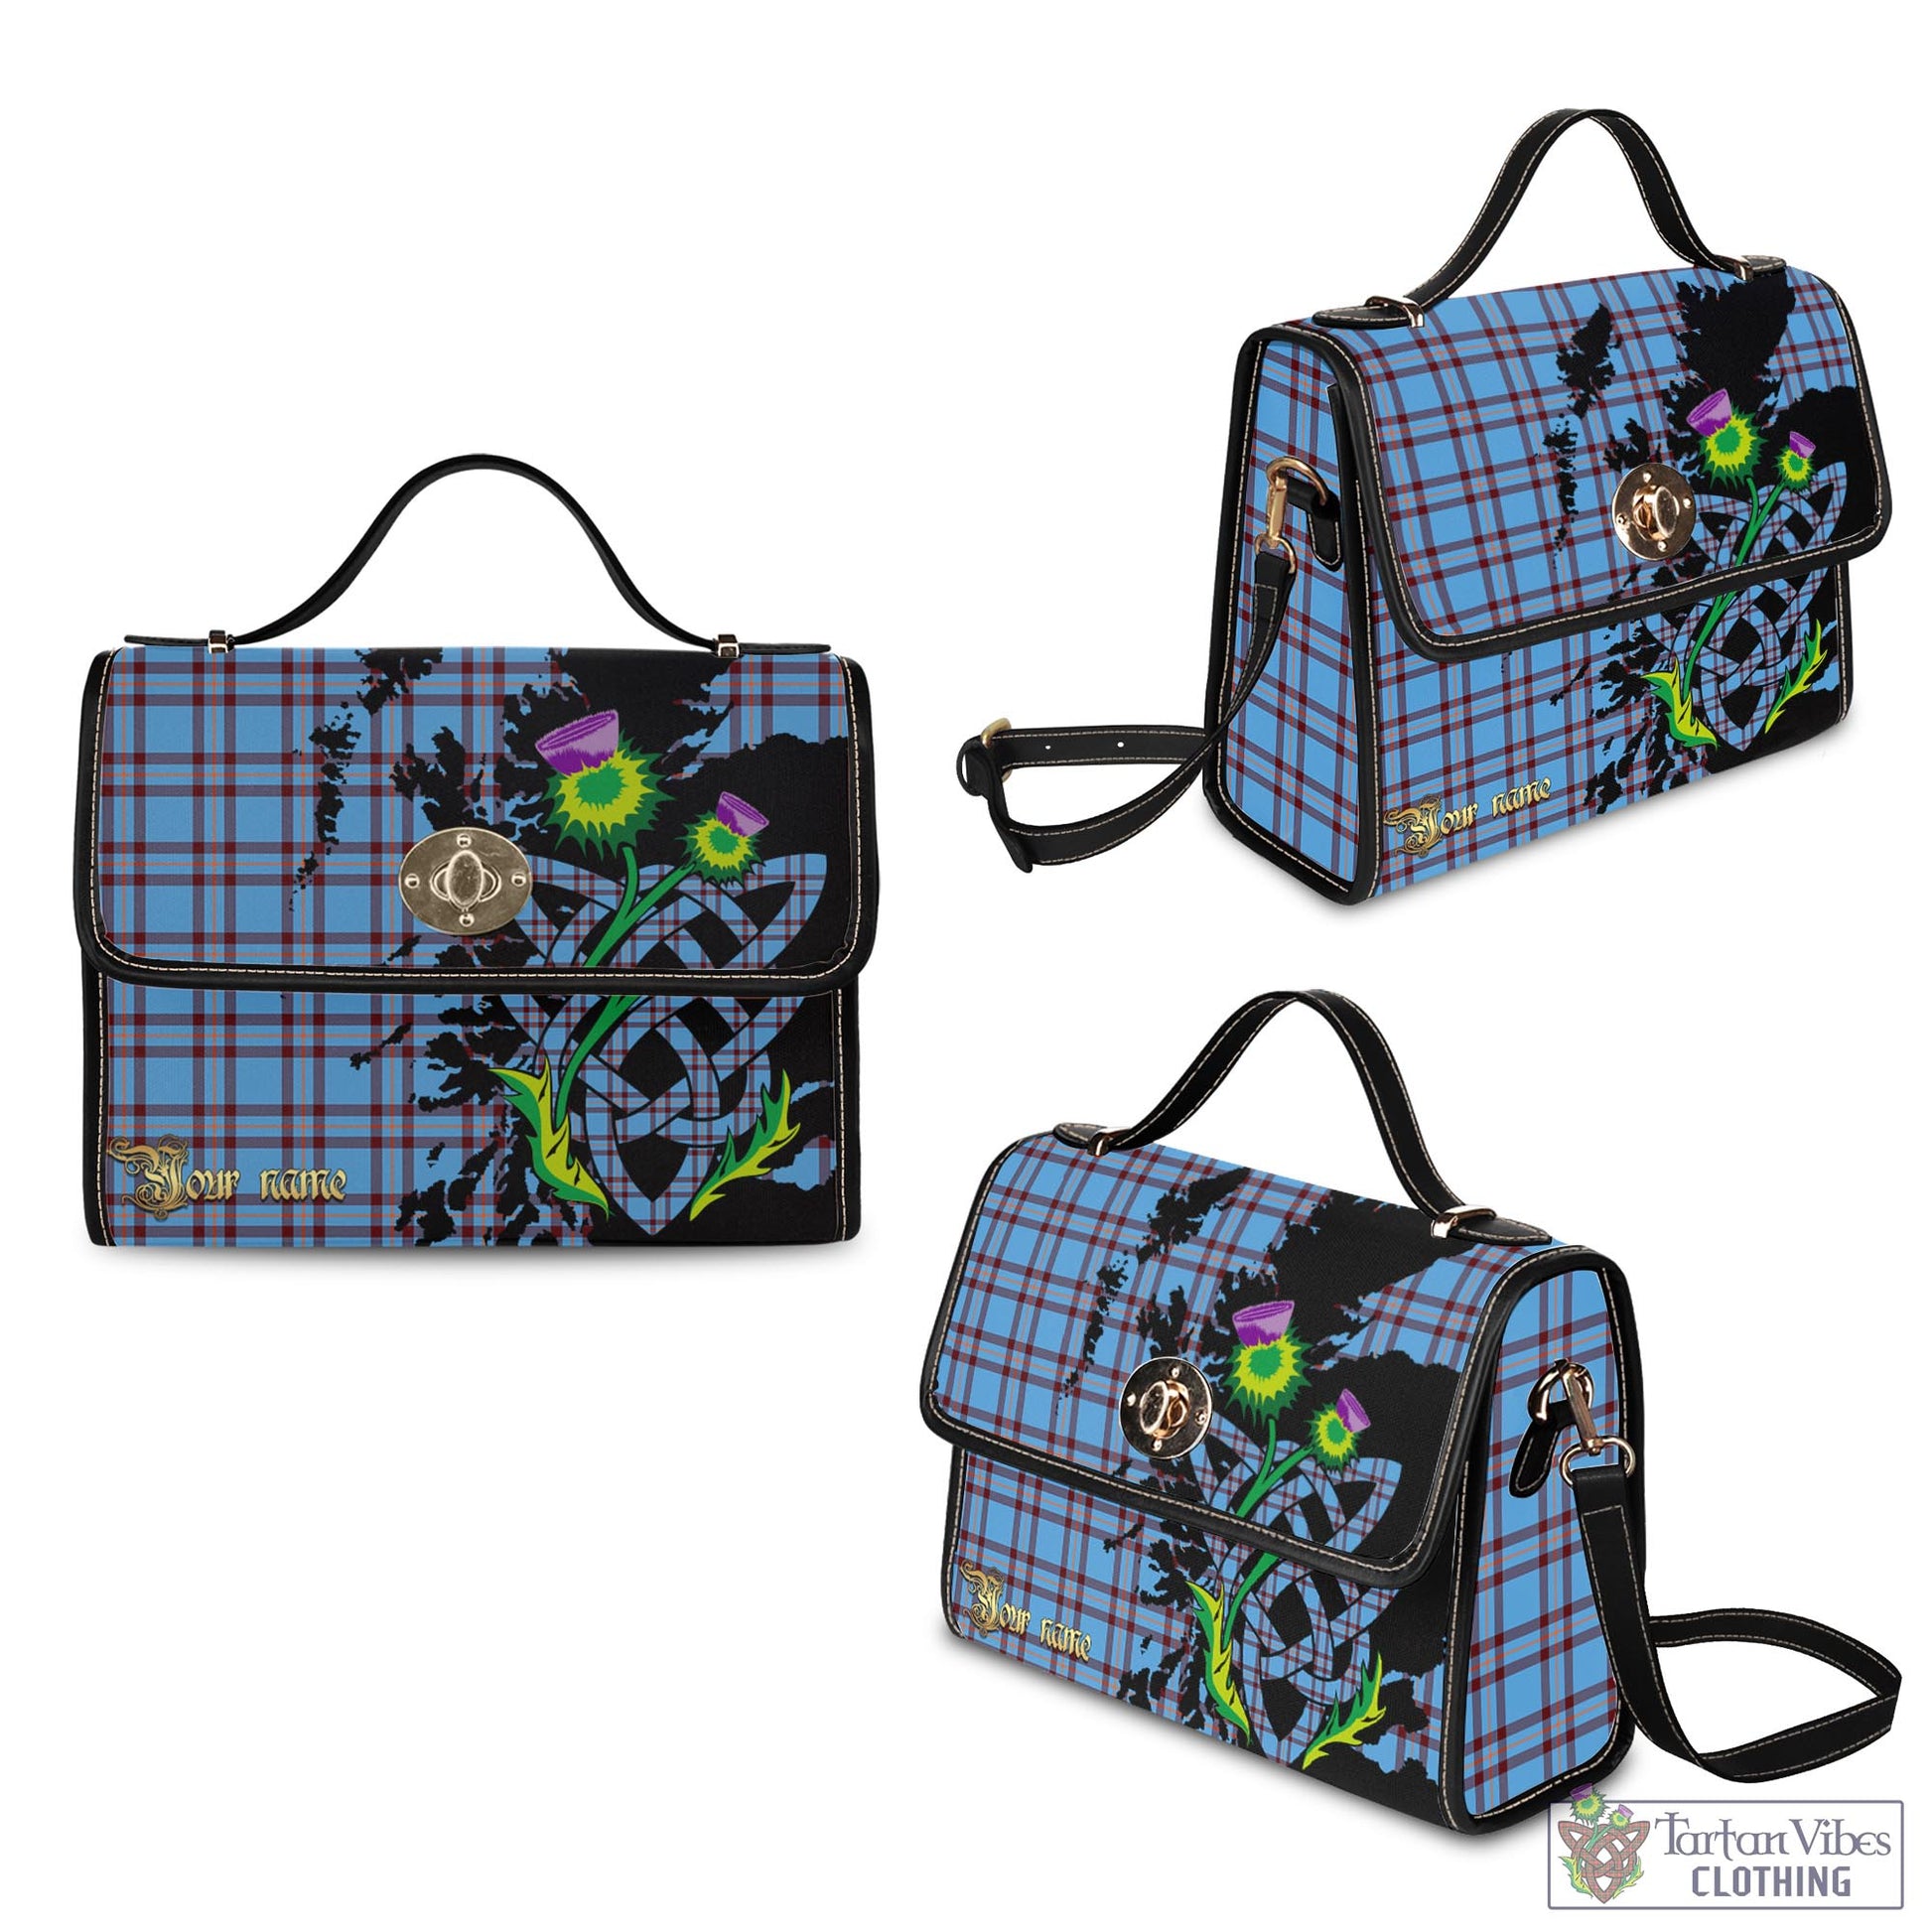 Tartan Vibes Clothing Elliot Ancient Tartan Waterproof Canvas Bag with Scotland Map and Thistle Celtic Accents